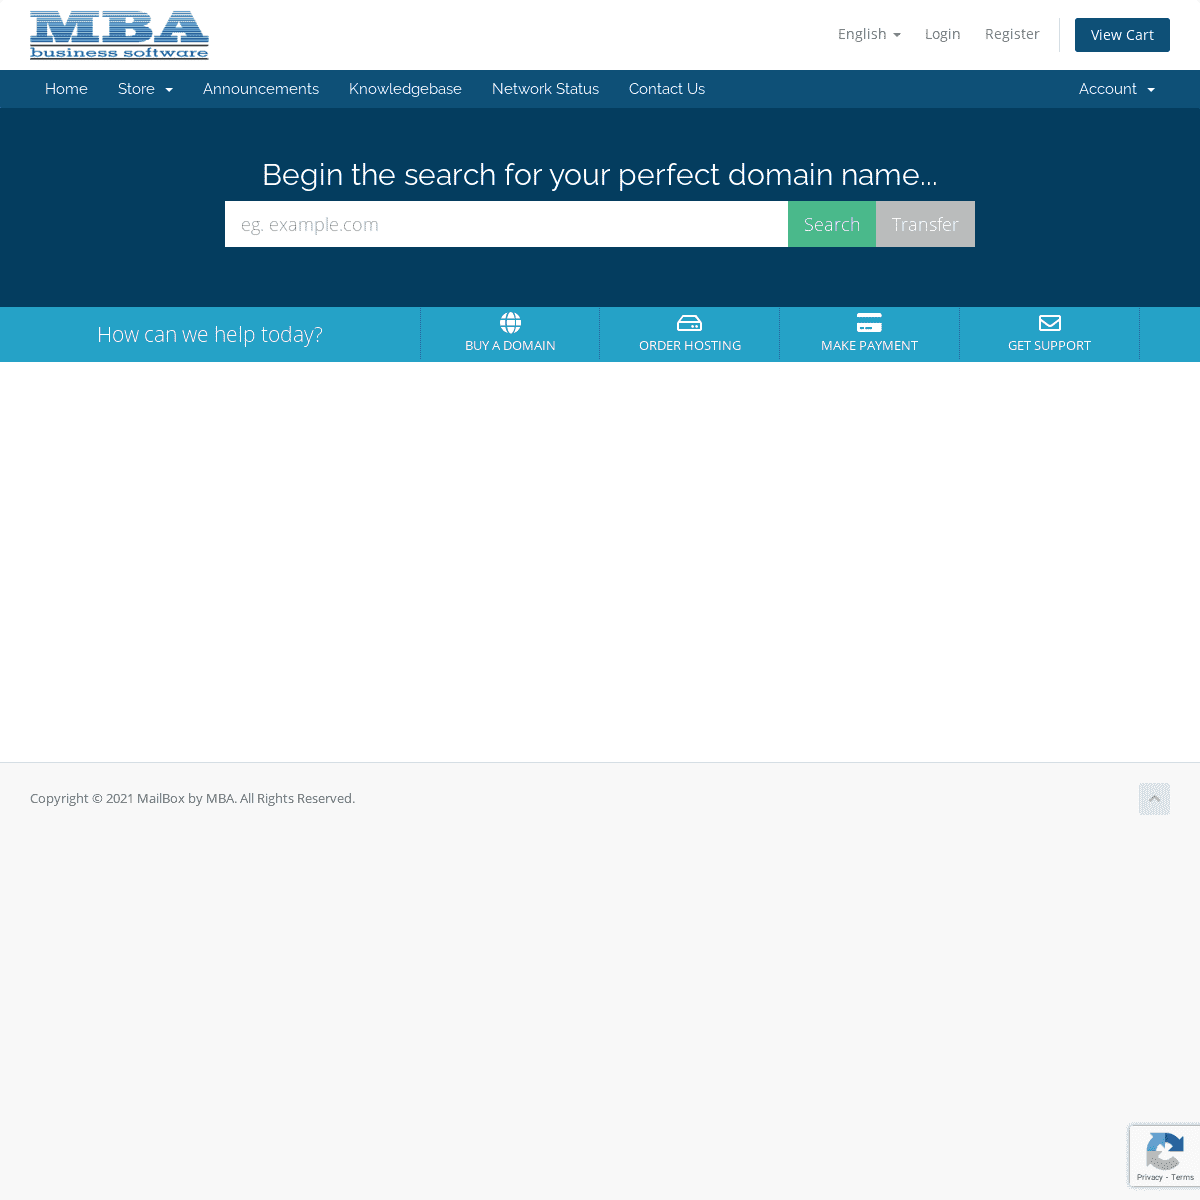 A complete backup of https://mailboxbymba.com